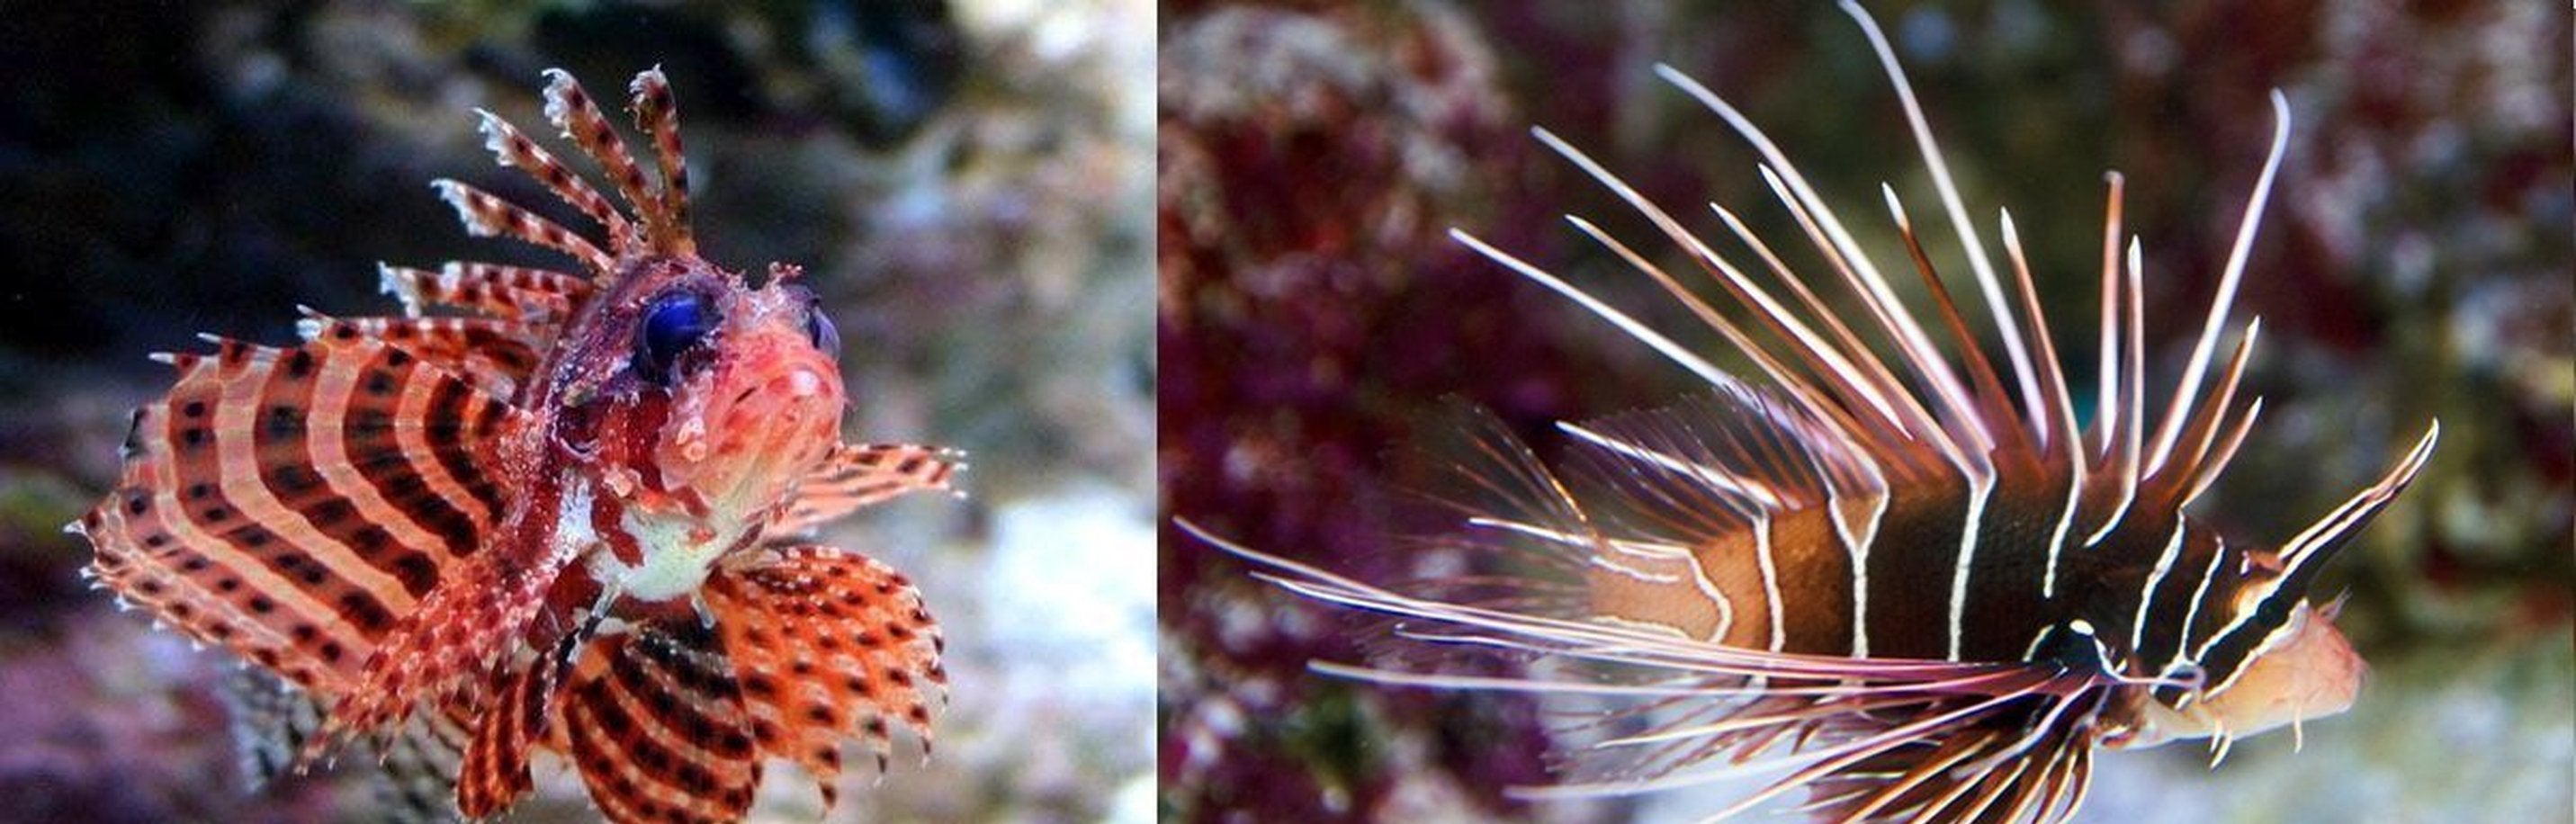 x1 Dwarf Fuzzy Lionfish Fish & x1 Radiata Lionfish Package - Med Approx 2"-marine fish packages-www.YourFishStore.com